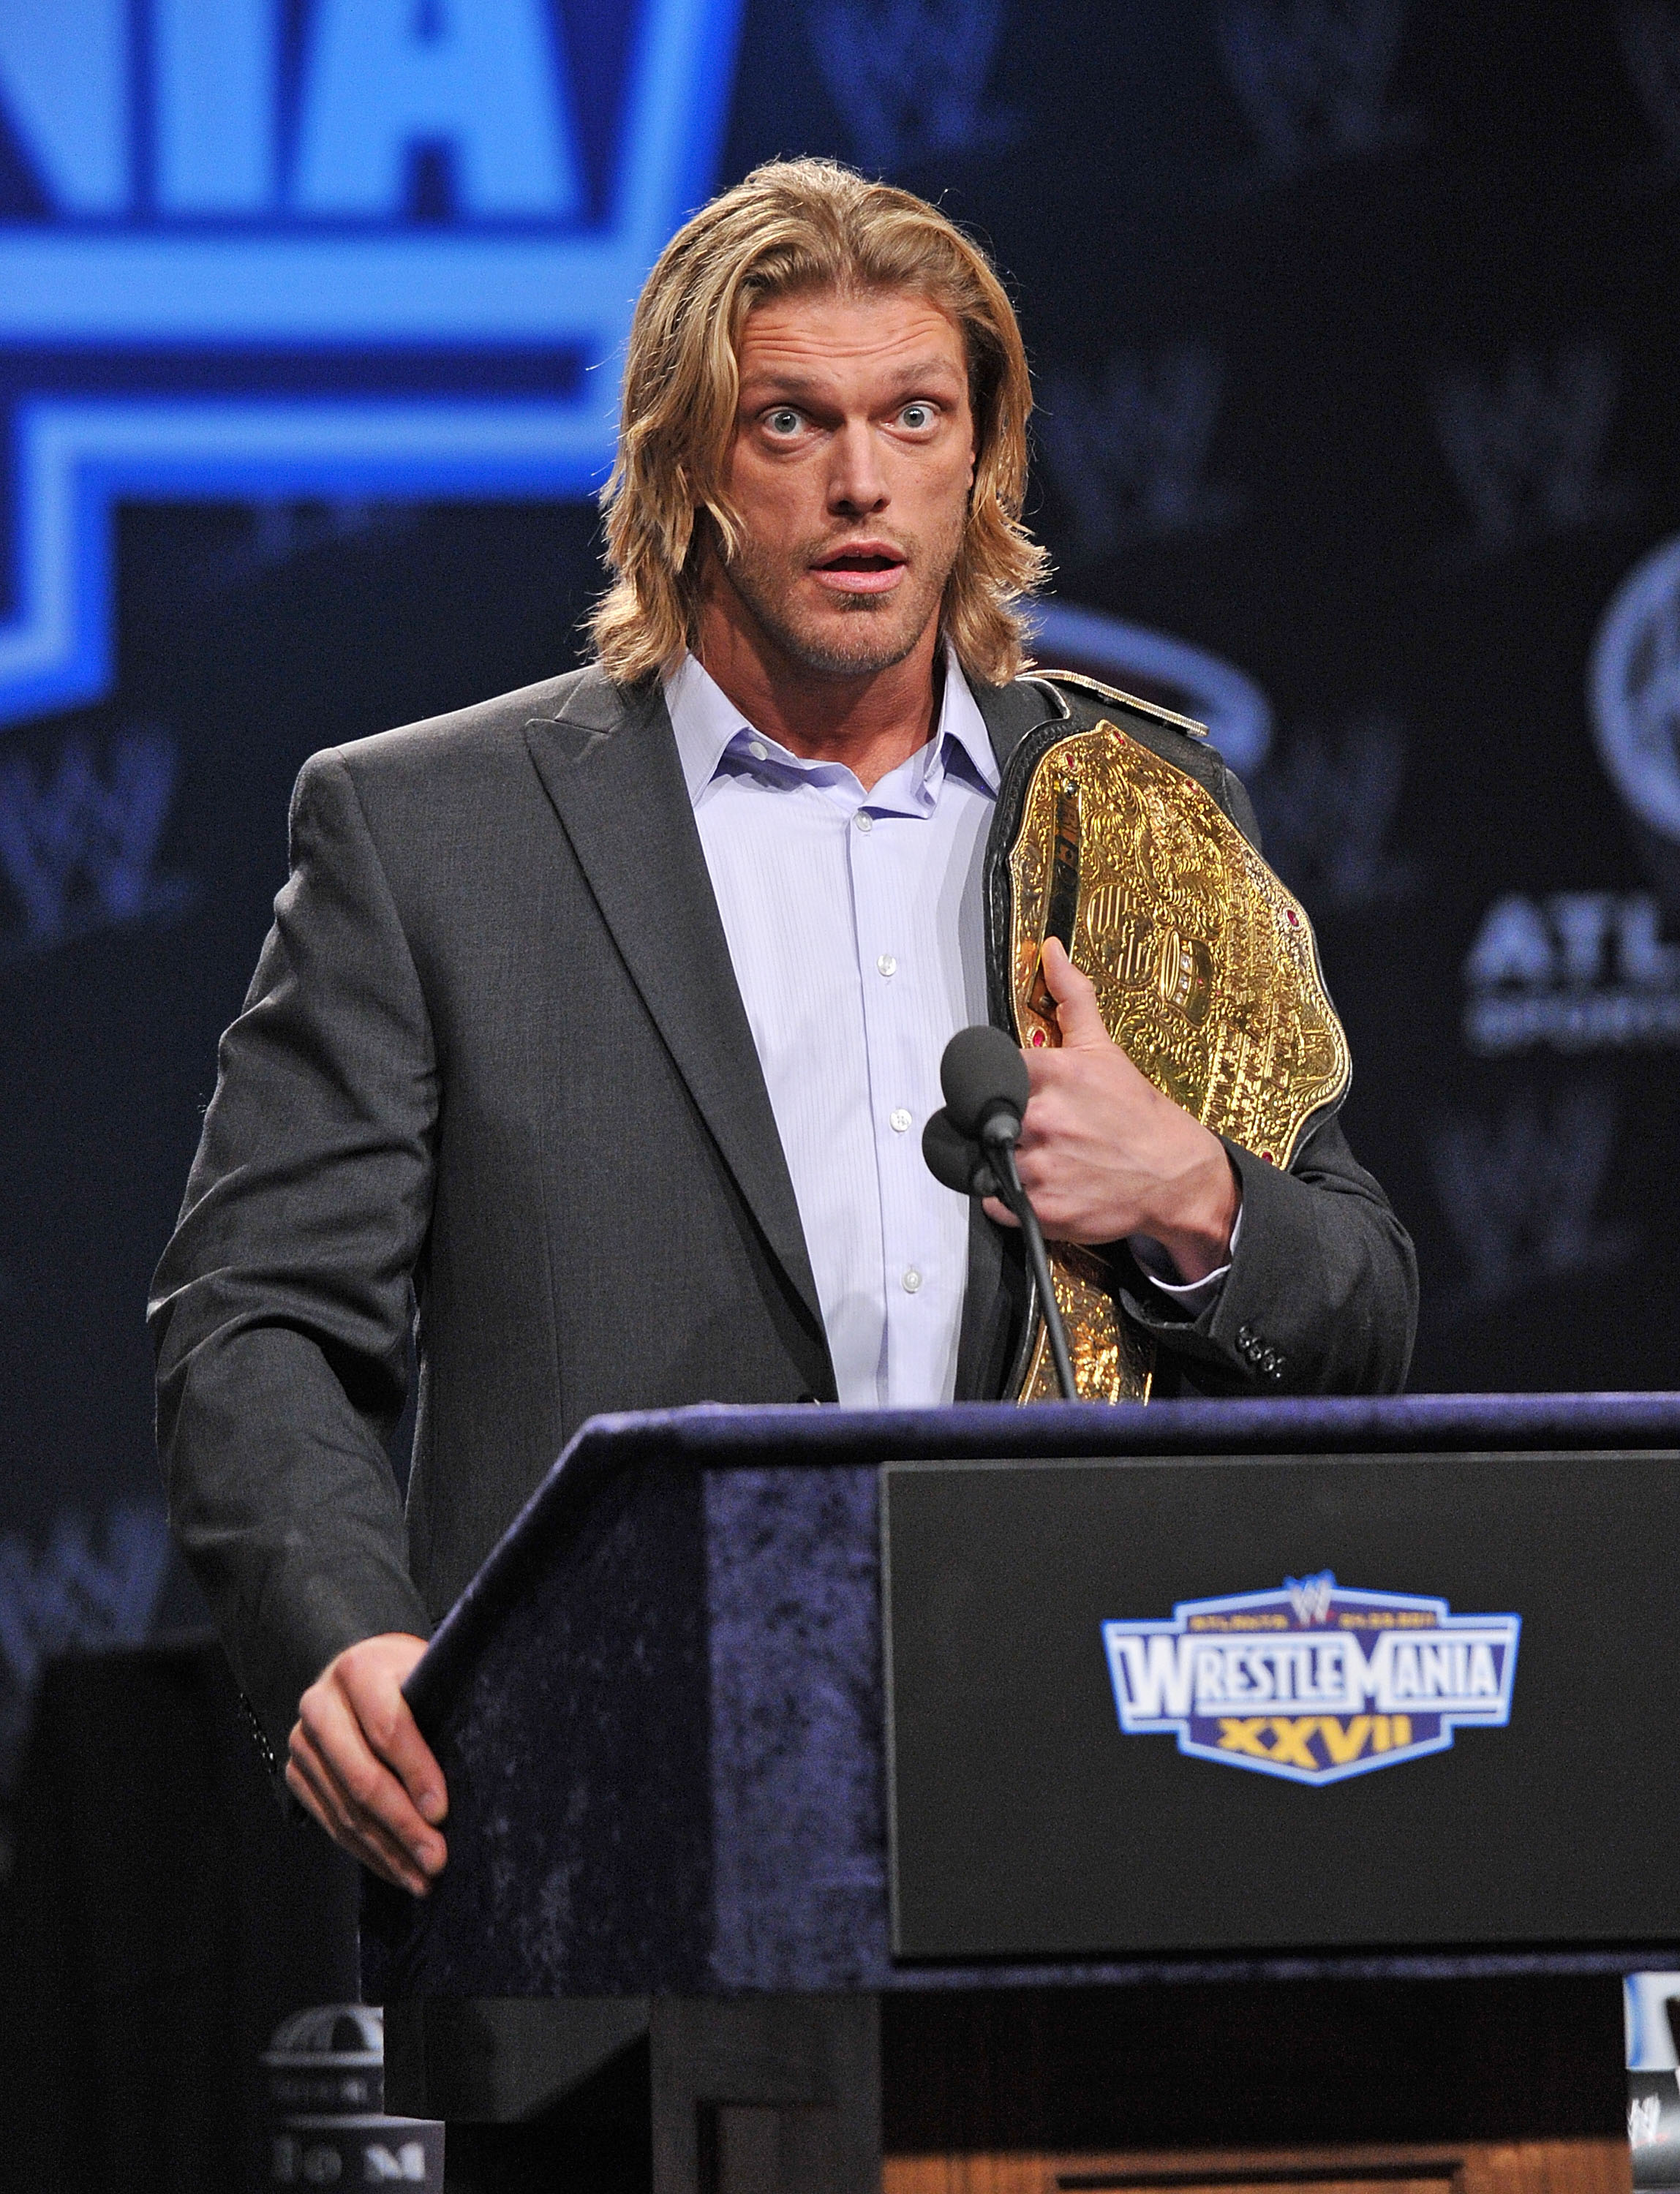 Edge at the WrestleMania XXVII press conference on March 30, 2011, in New York City. | Source: Getty Images